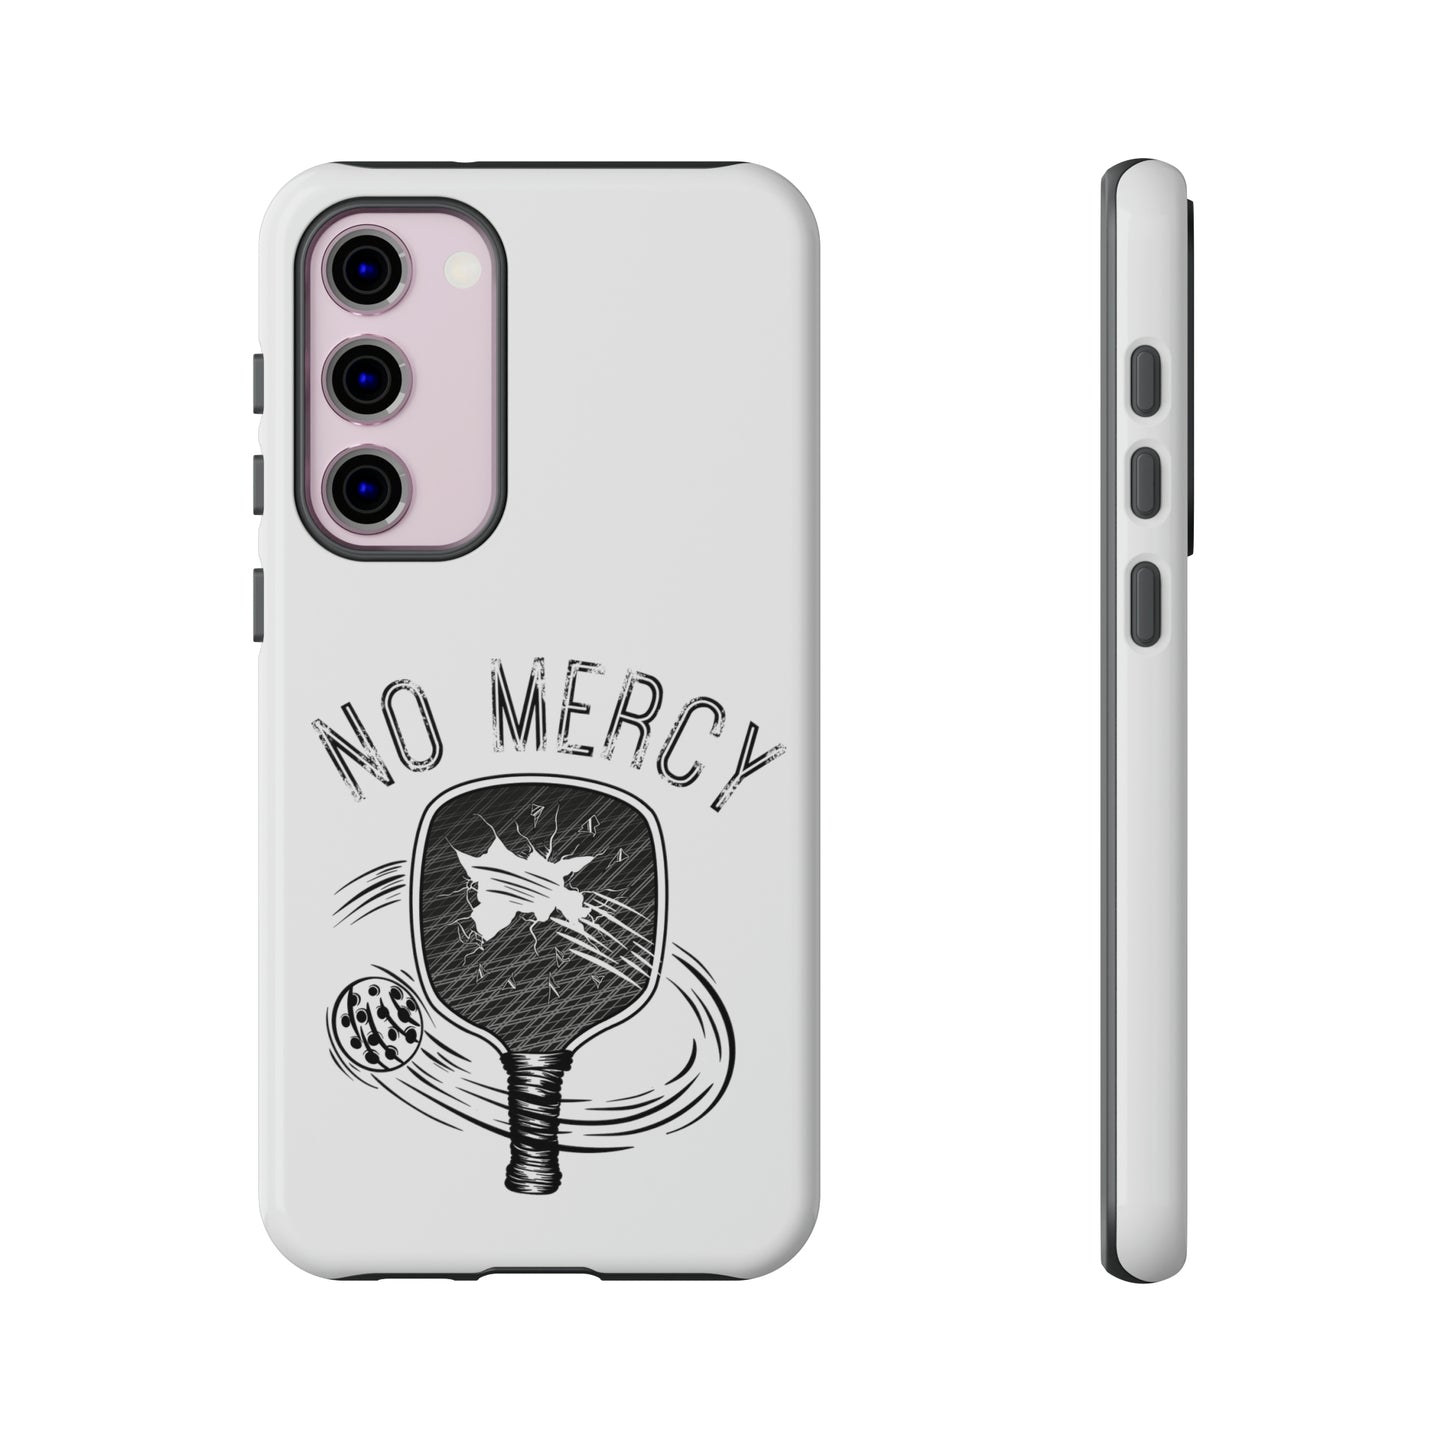 No Mercy Pickleball Series - Tough Dual-Layer Phone Case for Samsung Galaxy